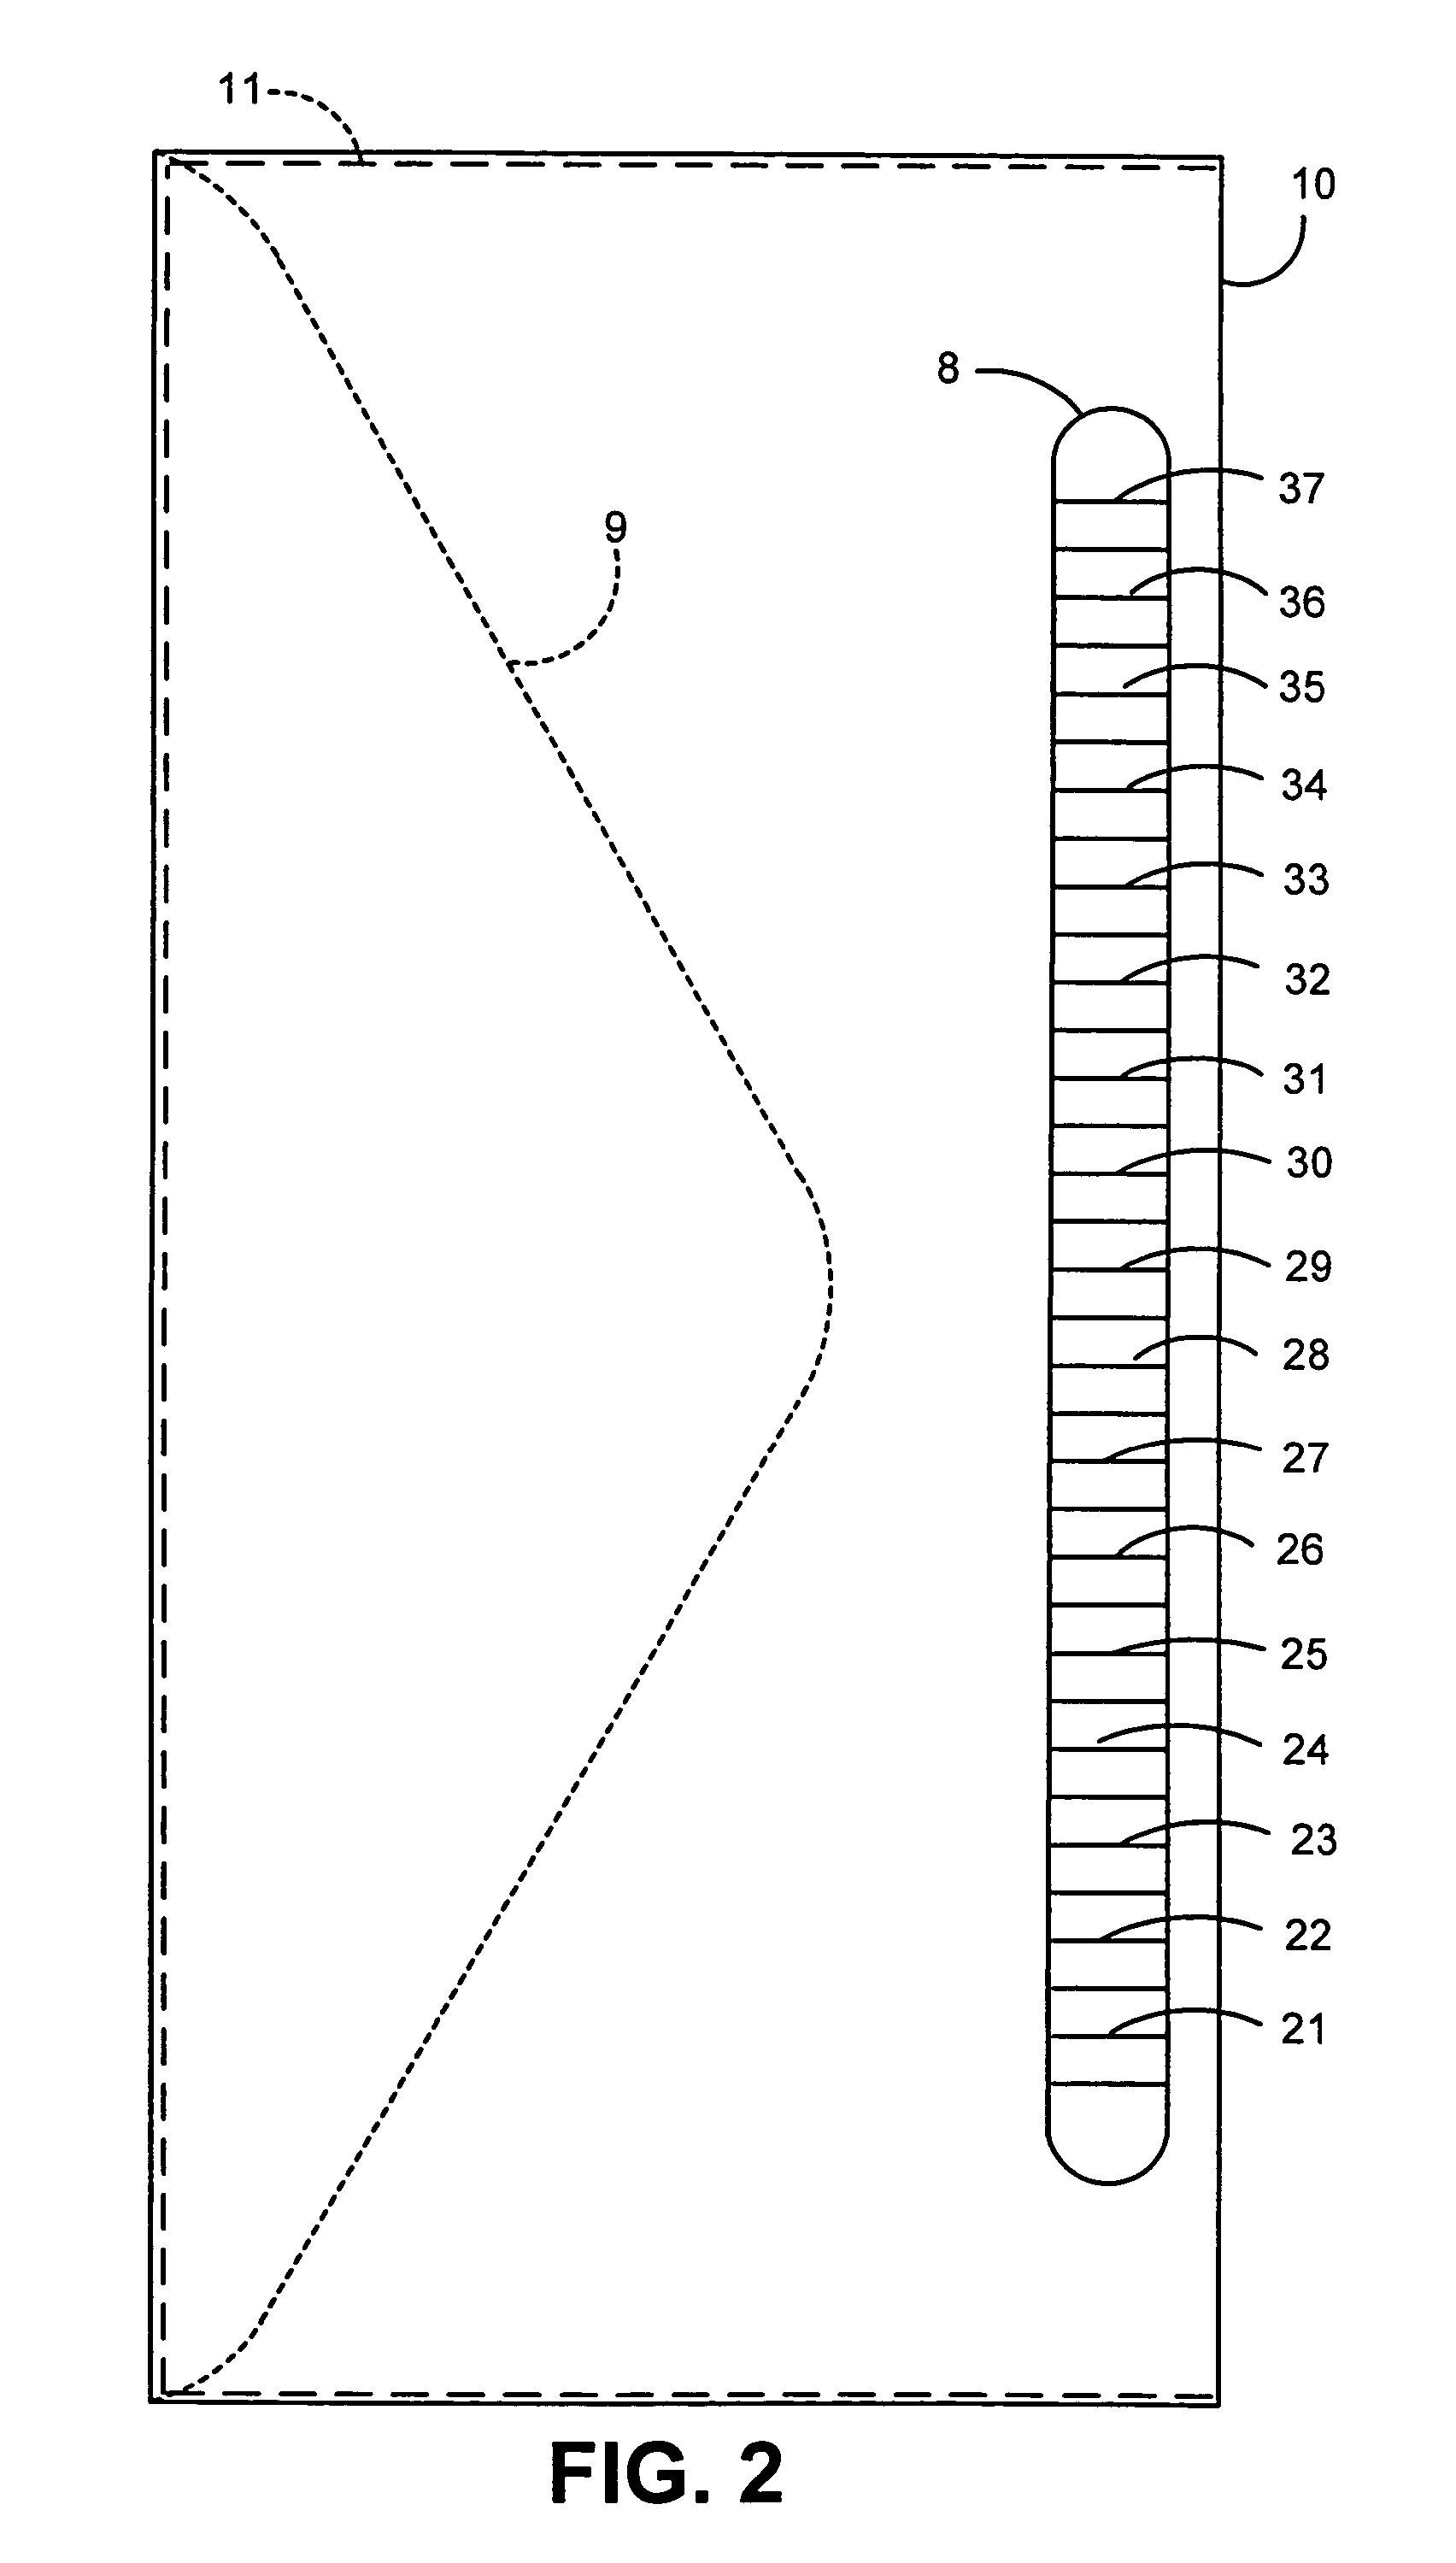 Method for a user to answer questions or queries using electrical contacts